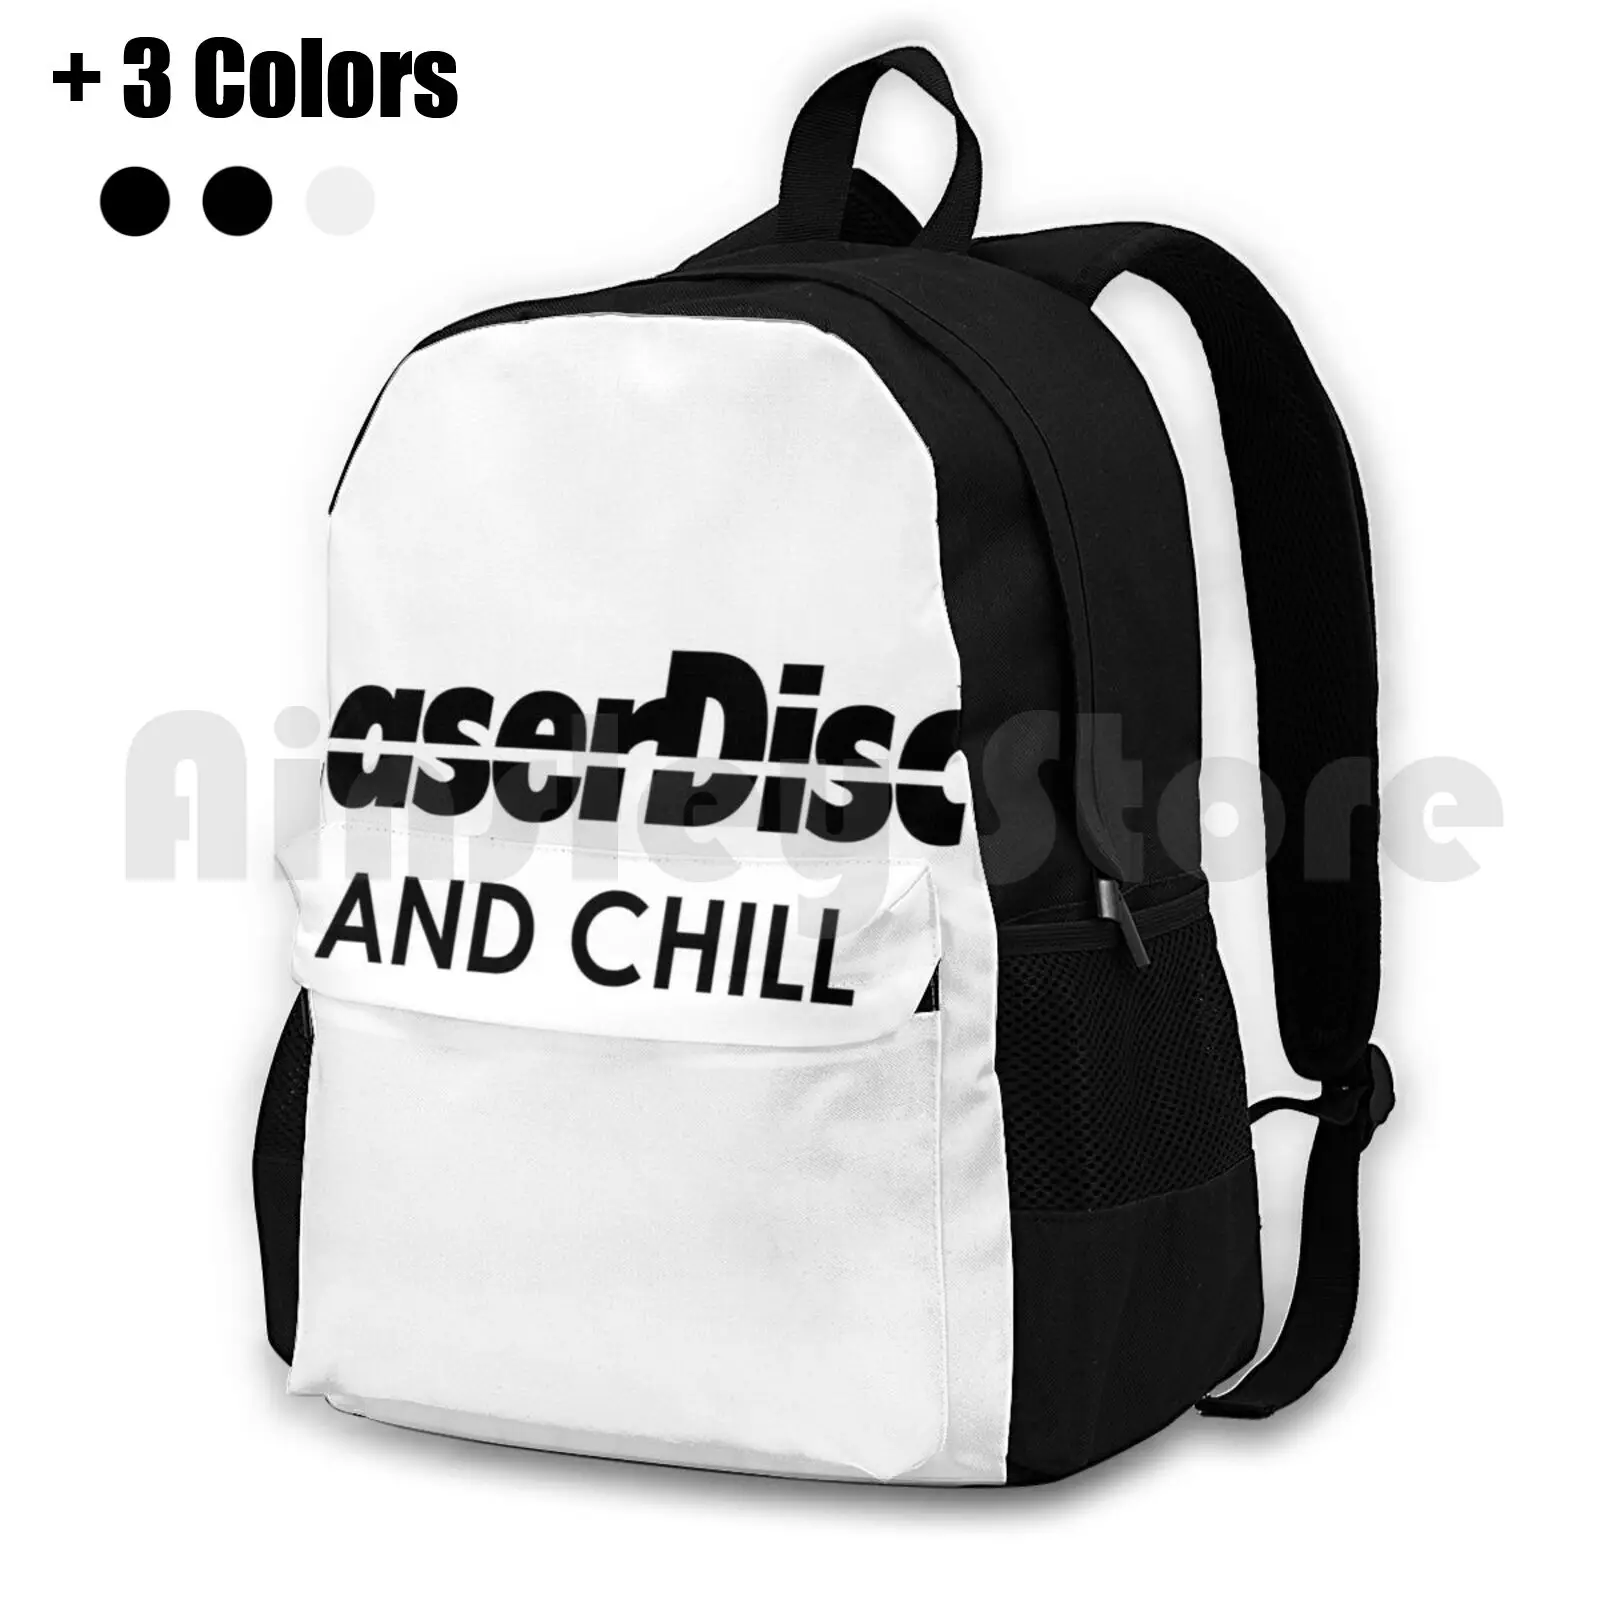 

Laserdisc And Chill Outdoor Hiking Backpack Waterproof Camping Travel Laserdisc Chill Netflix Movies Obsolete Media Format Video